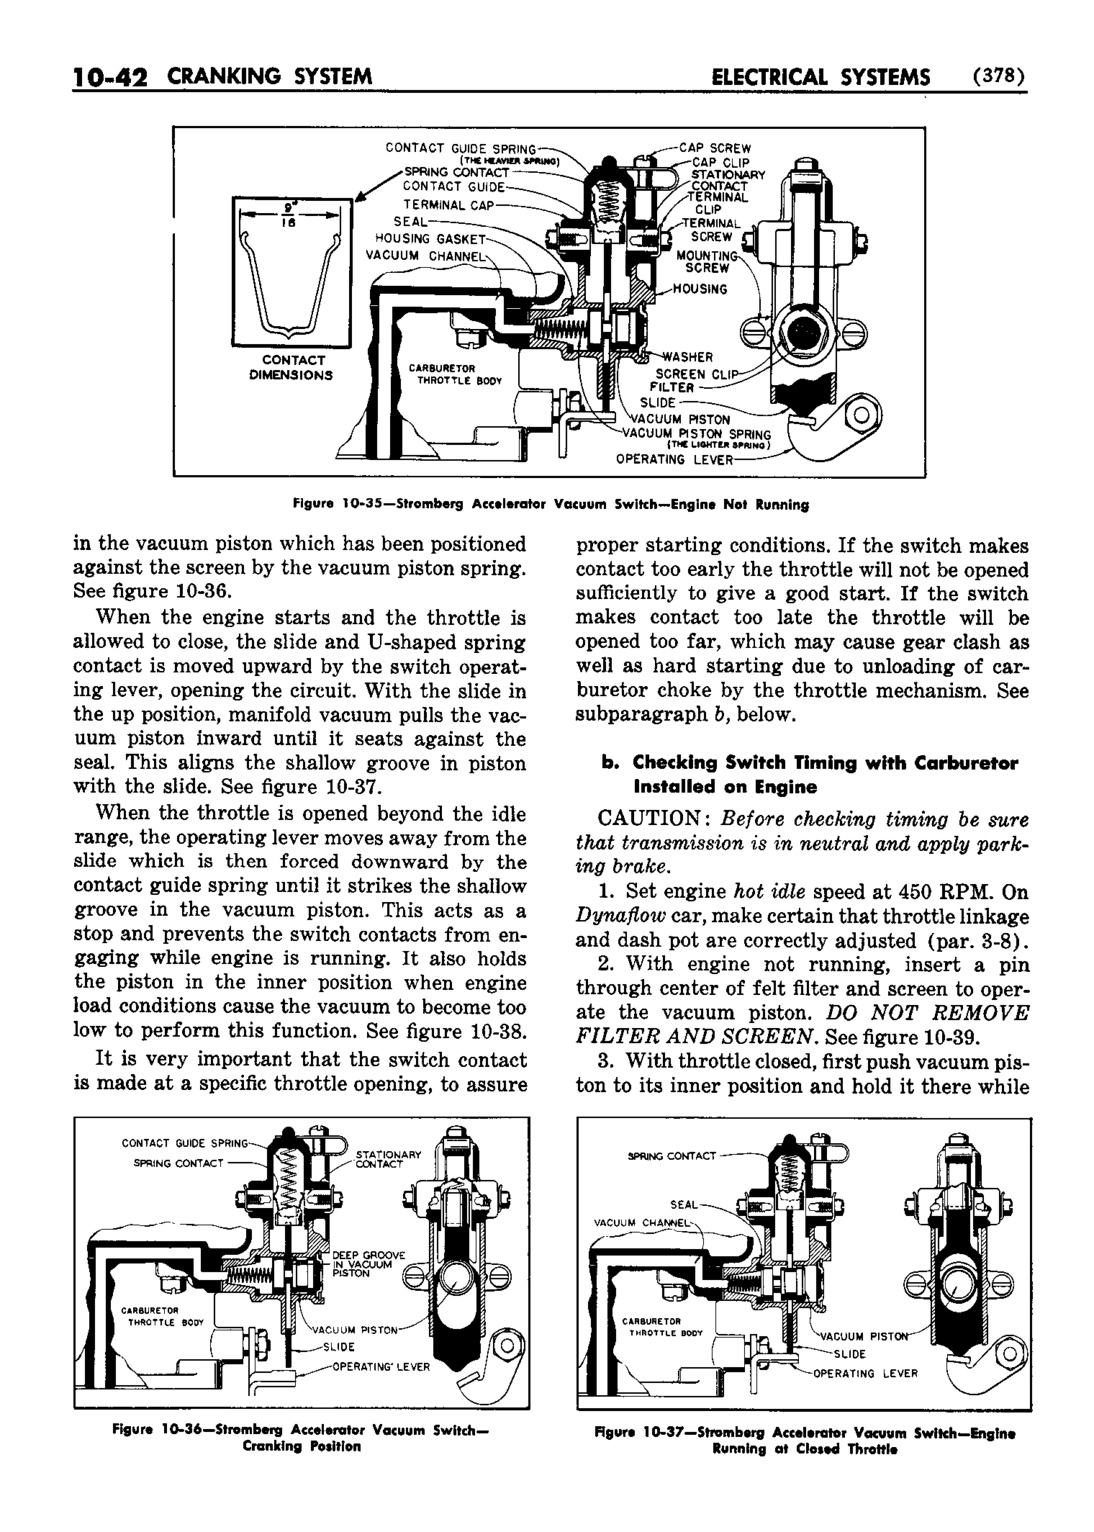 n_11 1952 Buick Shop Manual - Electrical Systems-042-042.jpg